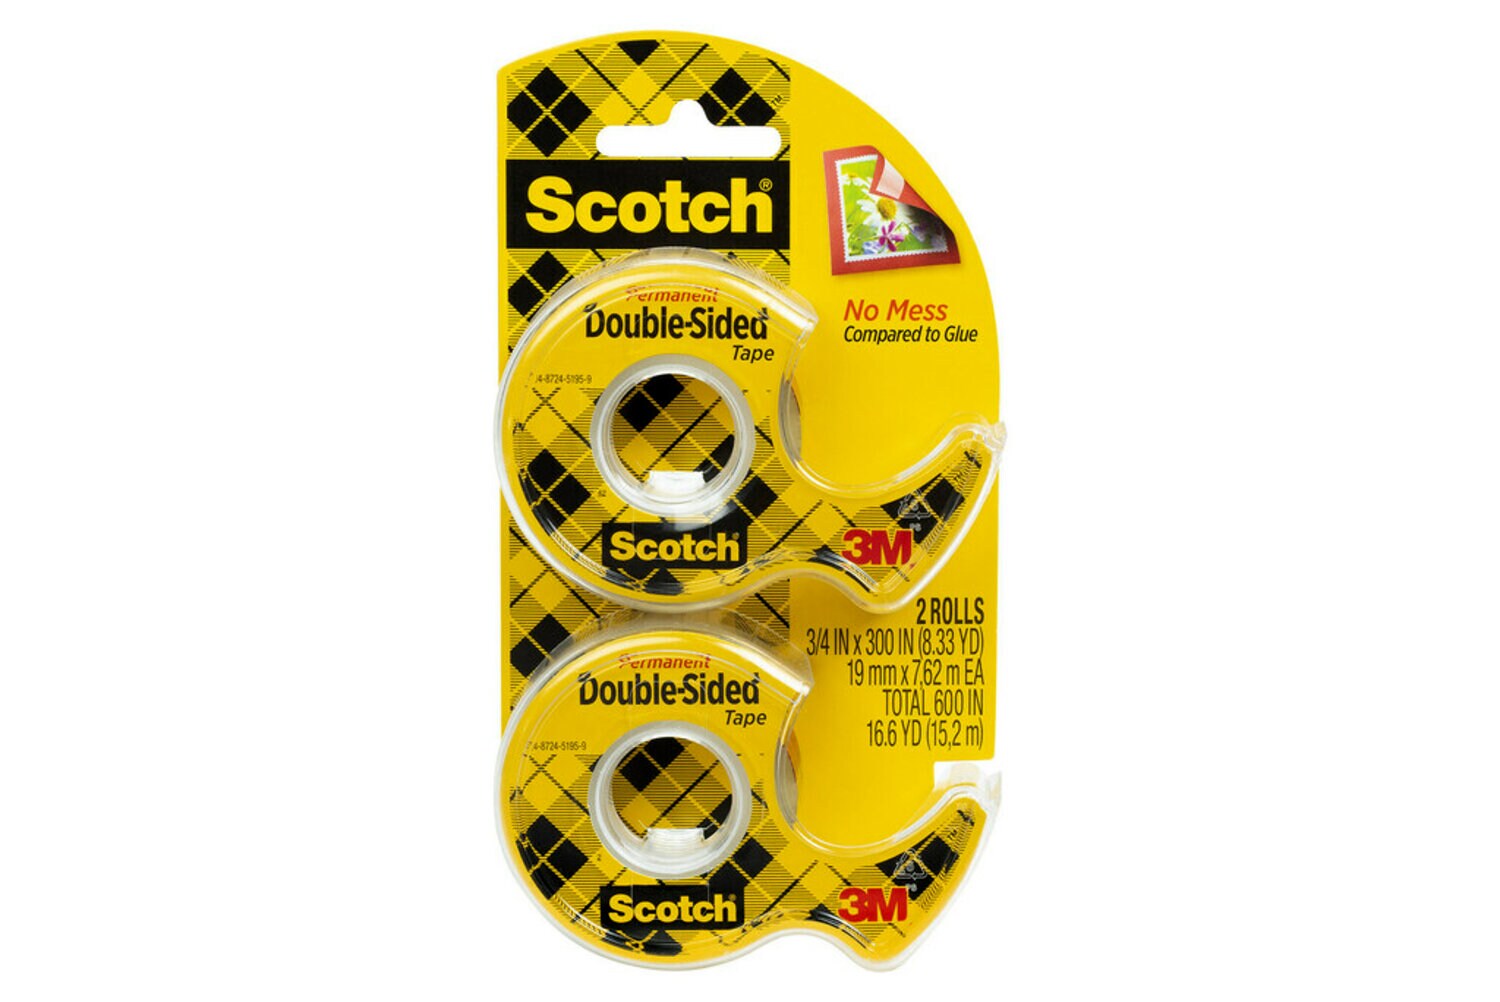 7010371401 - Scotch Double Sided Tape 237DM-2, 3/4 in x 300 in